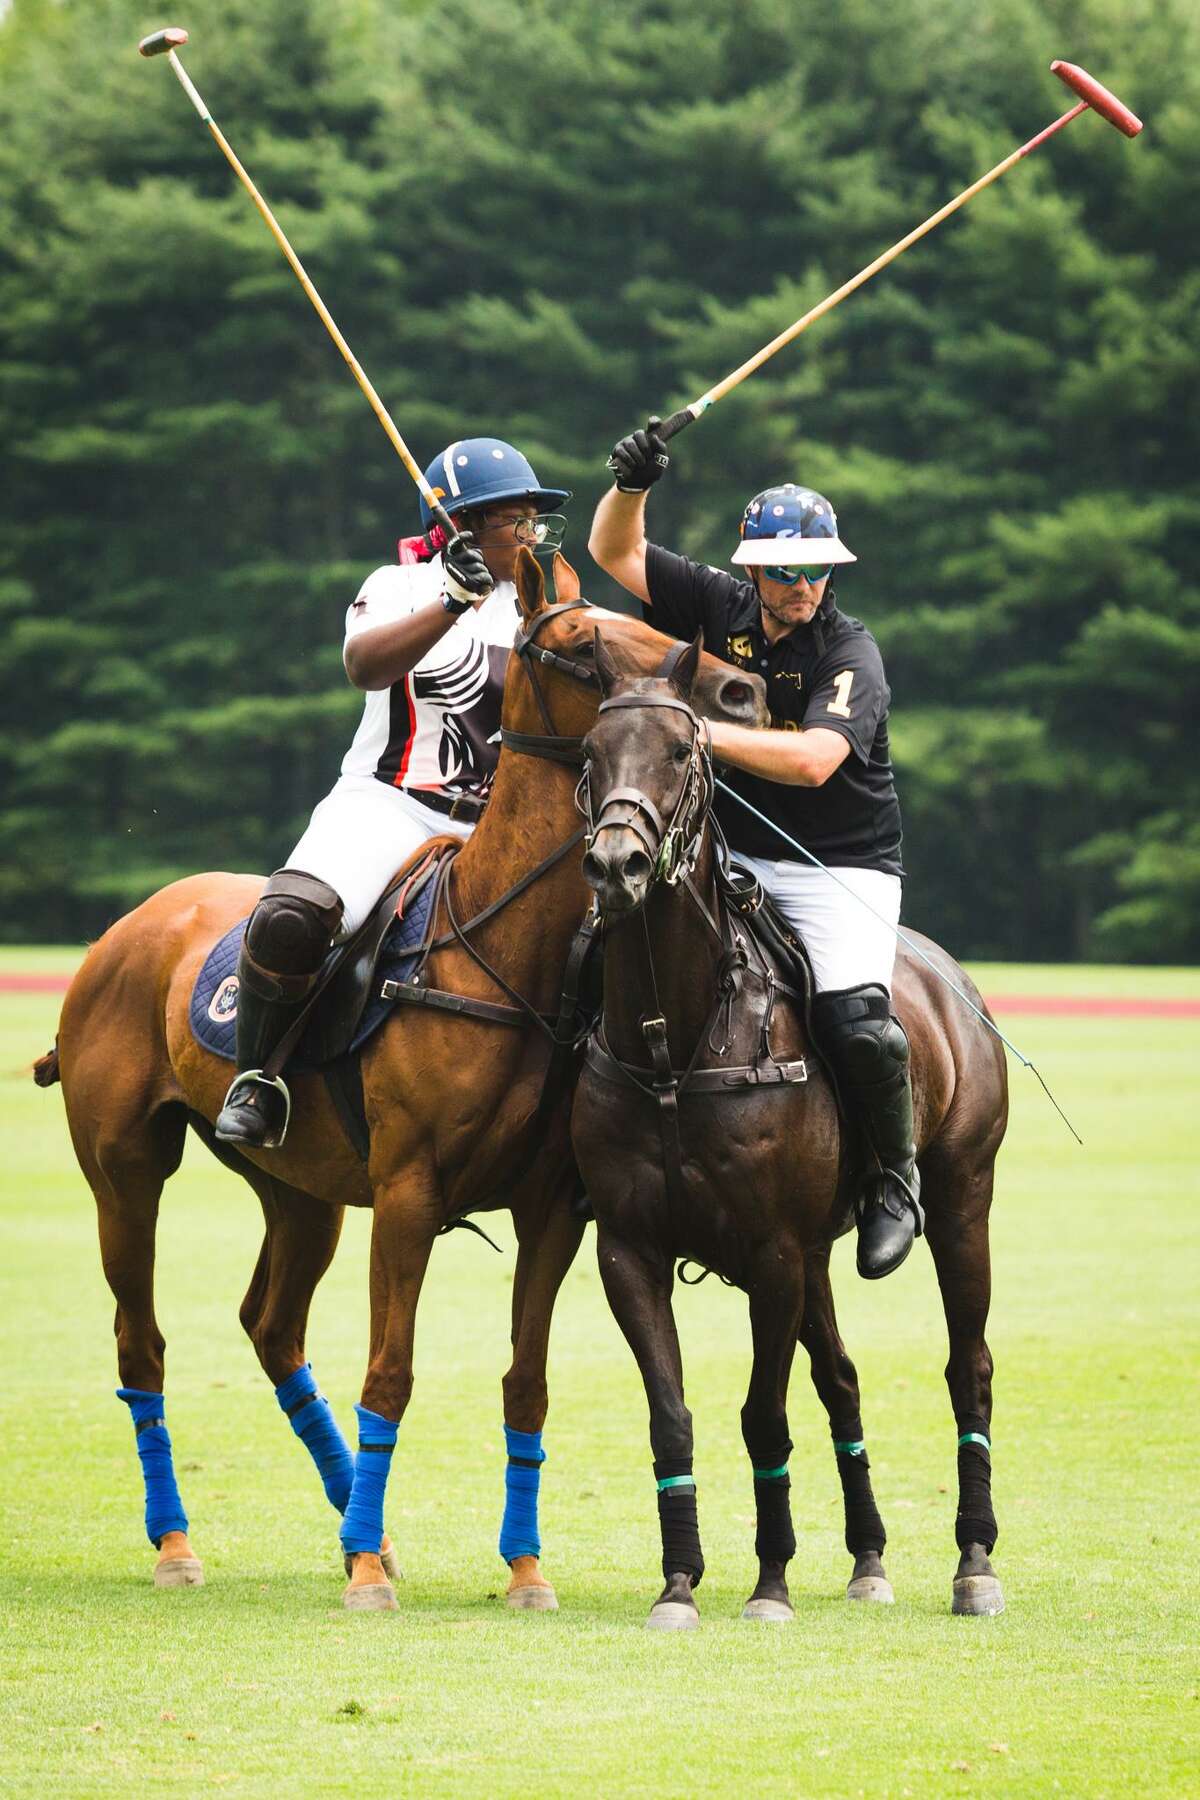 Shariah Harris goes up against Joseph Manheim in the 2017 Silver Cup Polo Match at the Greenwich Polo Club in Greenwich, Conn. on Friday, June 30, 2017. 19-year-old Harris, an inner-city teen from South Philadelphia, made history Friday as the first African American female to play high goal polo in the United States.